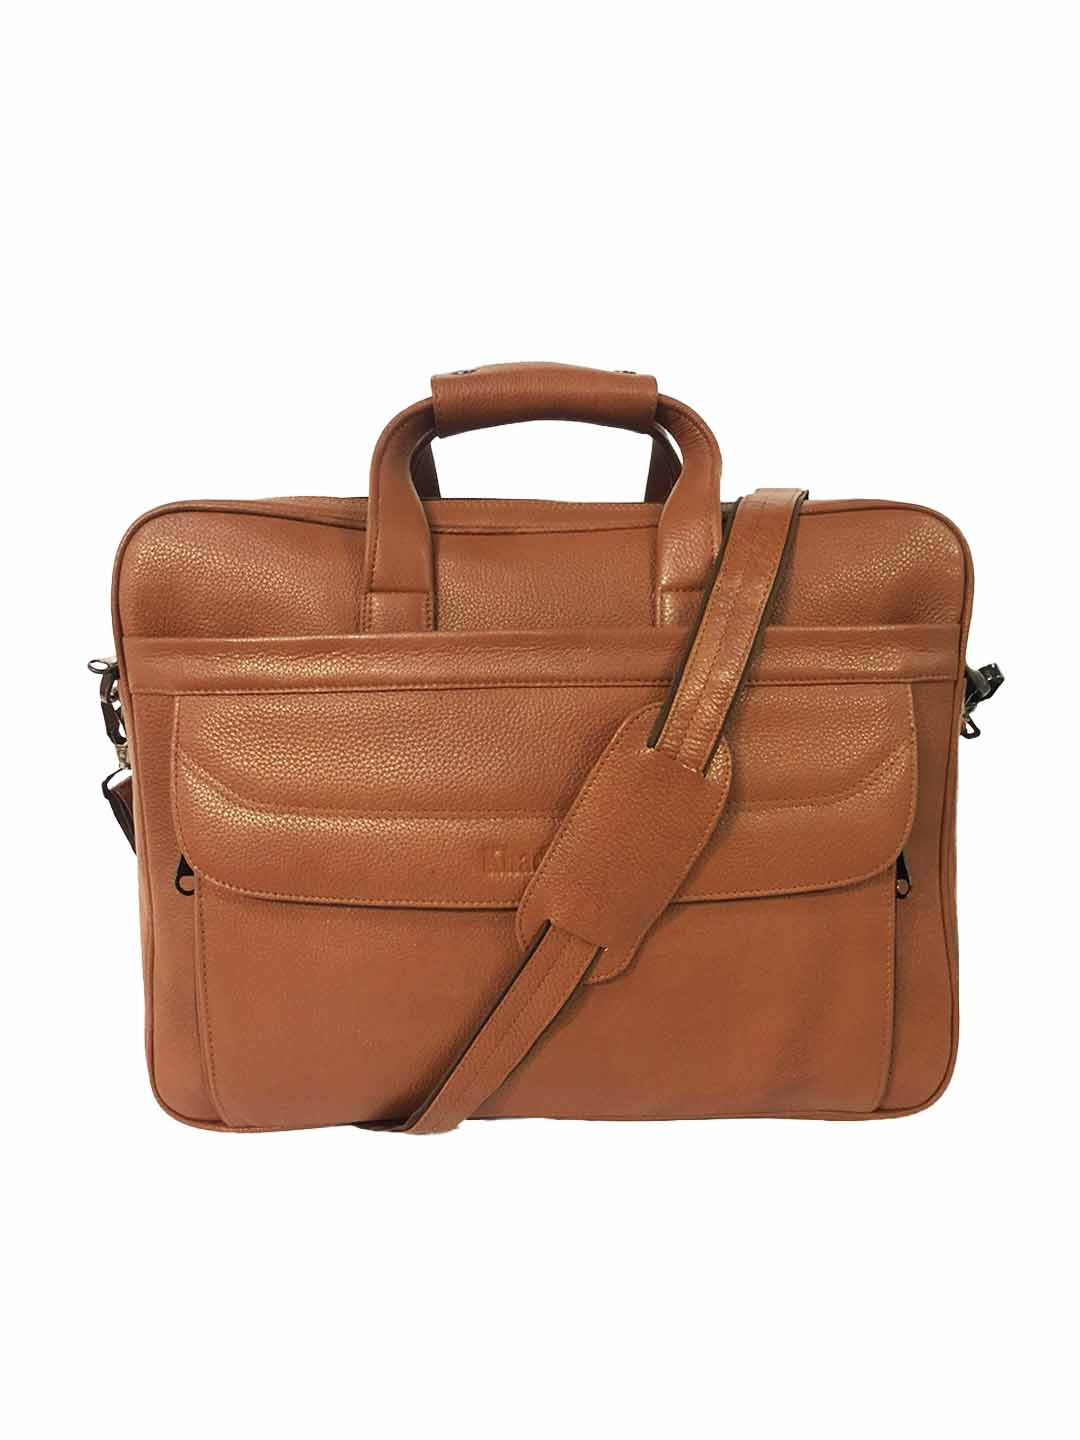 Buy WildHorn Leather Laptop Messenger Bag for LaptopMacBook up to 156  inch Padded Laptop Compartment Office Bag I 365 Days Warranty at Amazonin